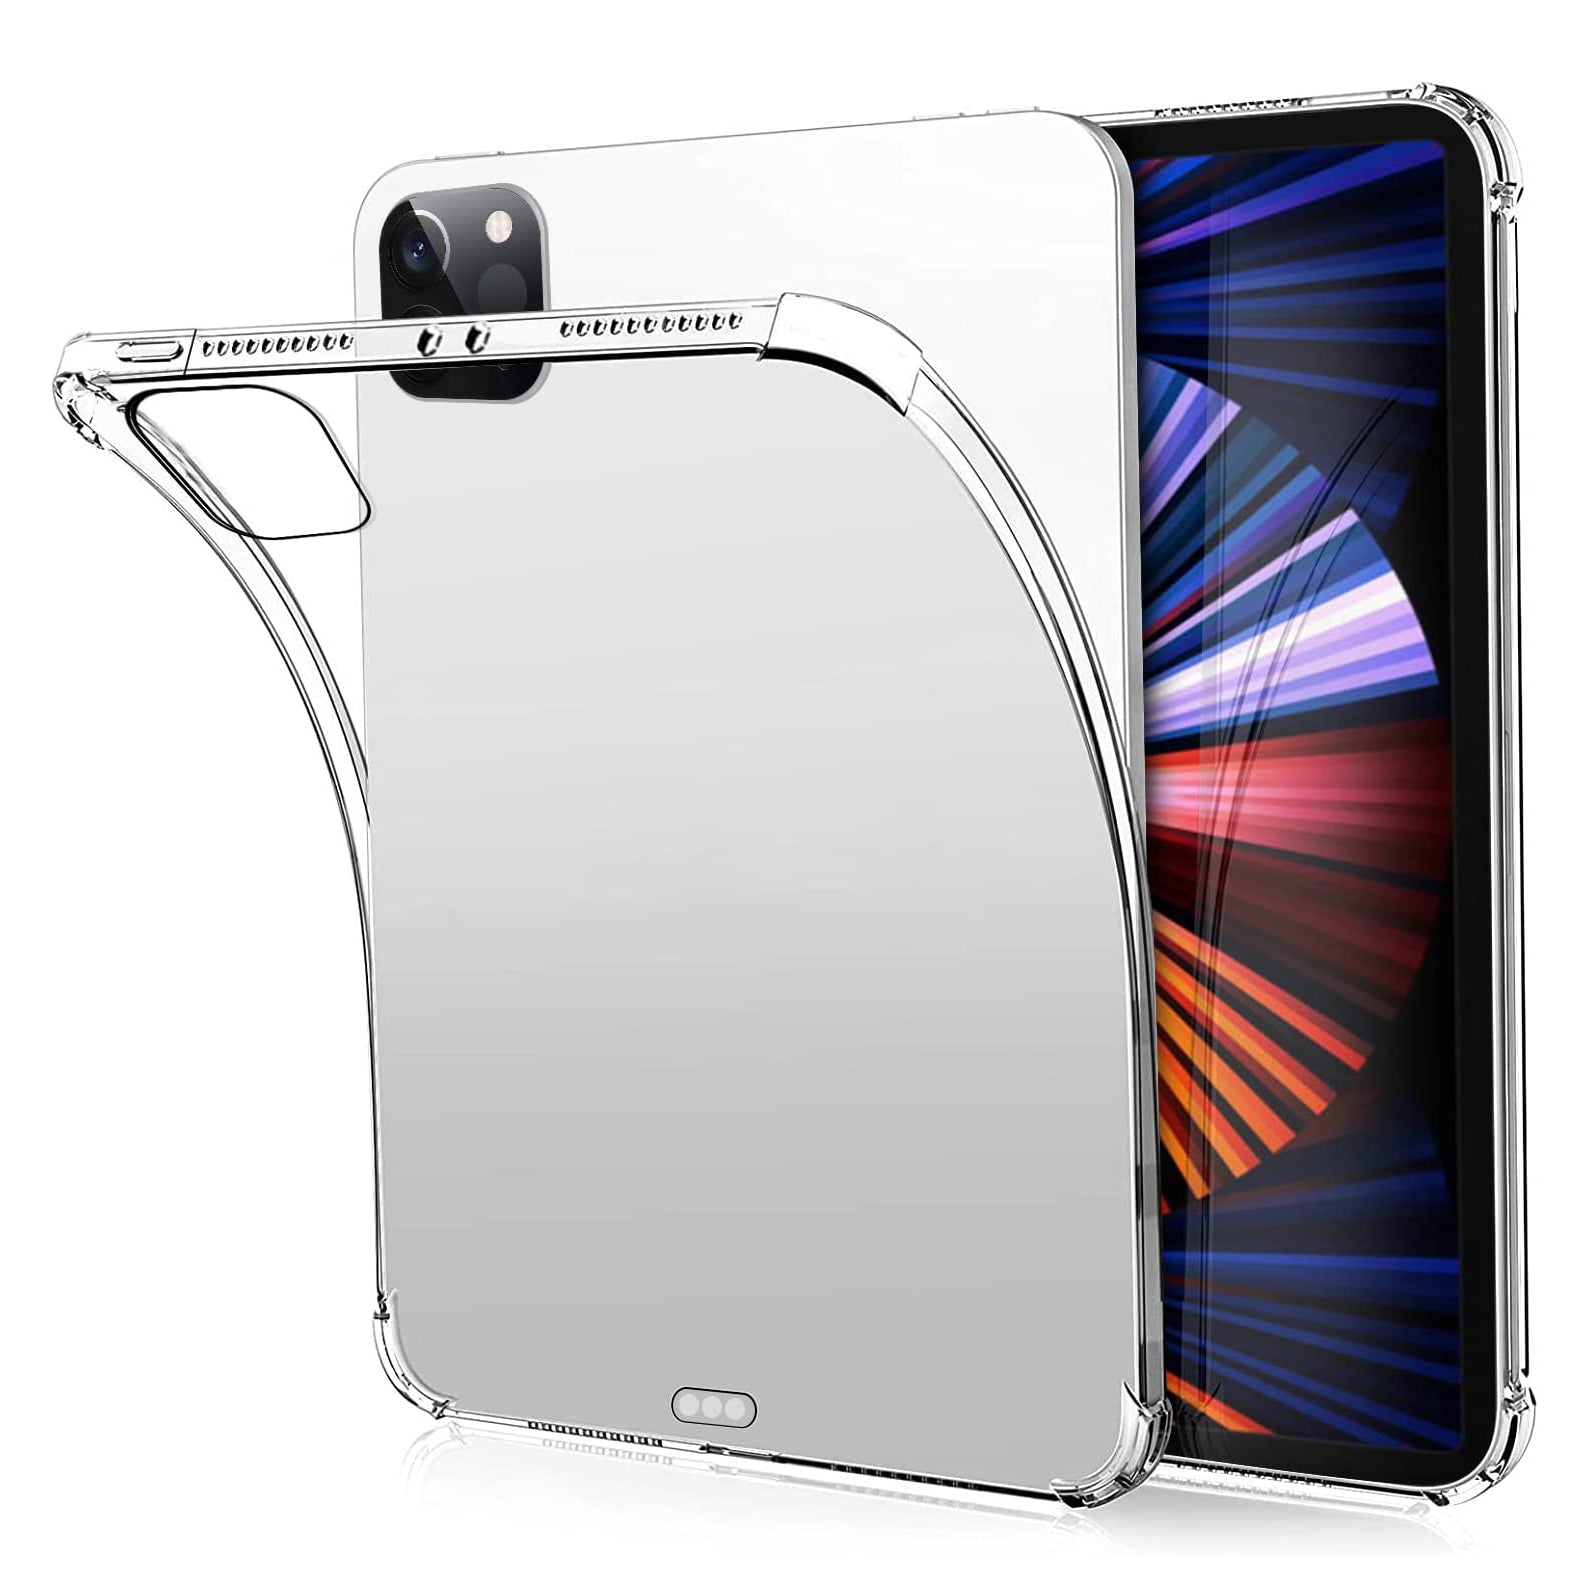 Clear Soft TPU Cover For Apple iPad Pro 12.9 5th Gen 2021 ShockProof Bumper Case